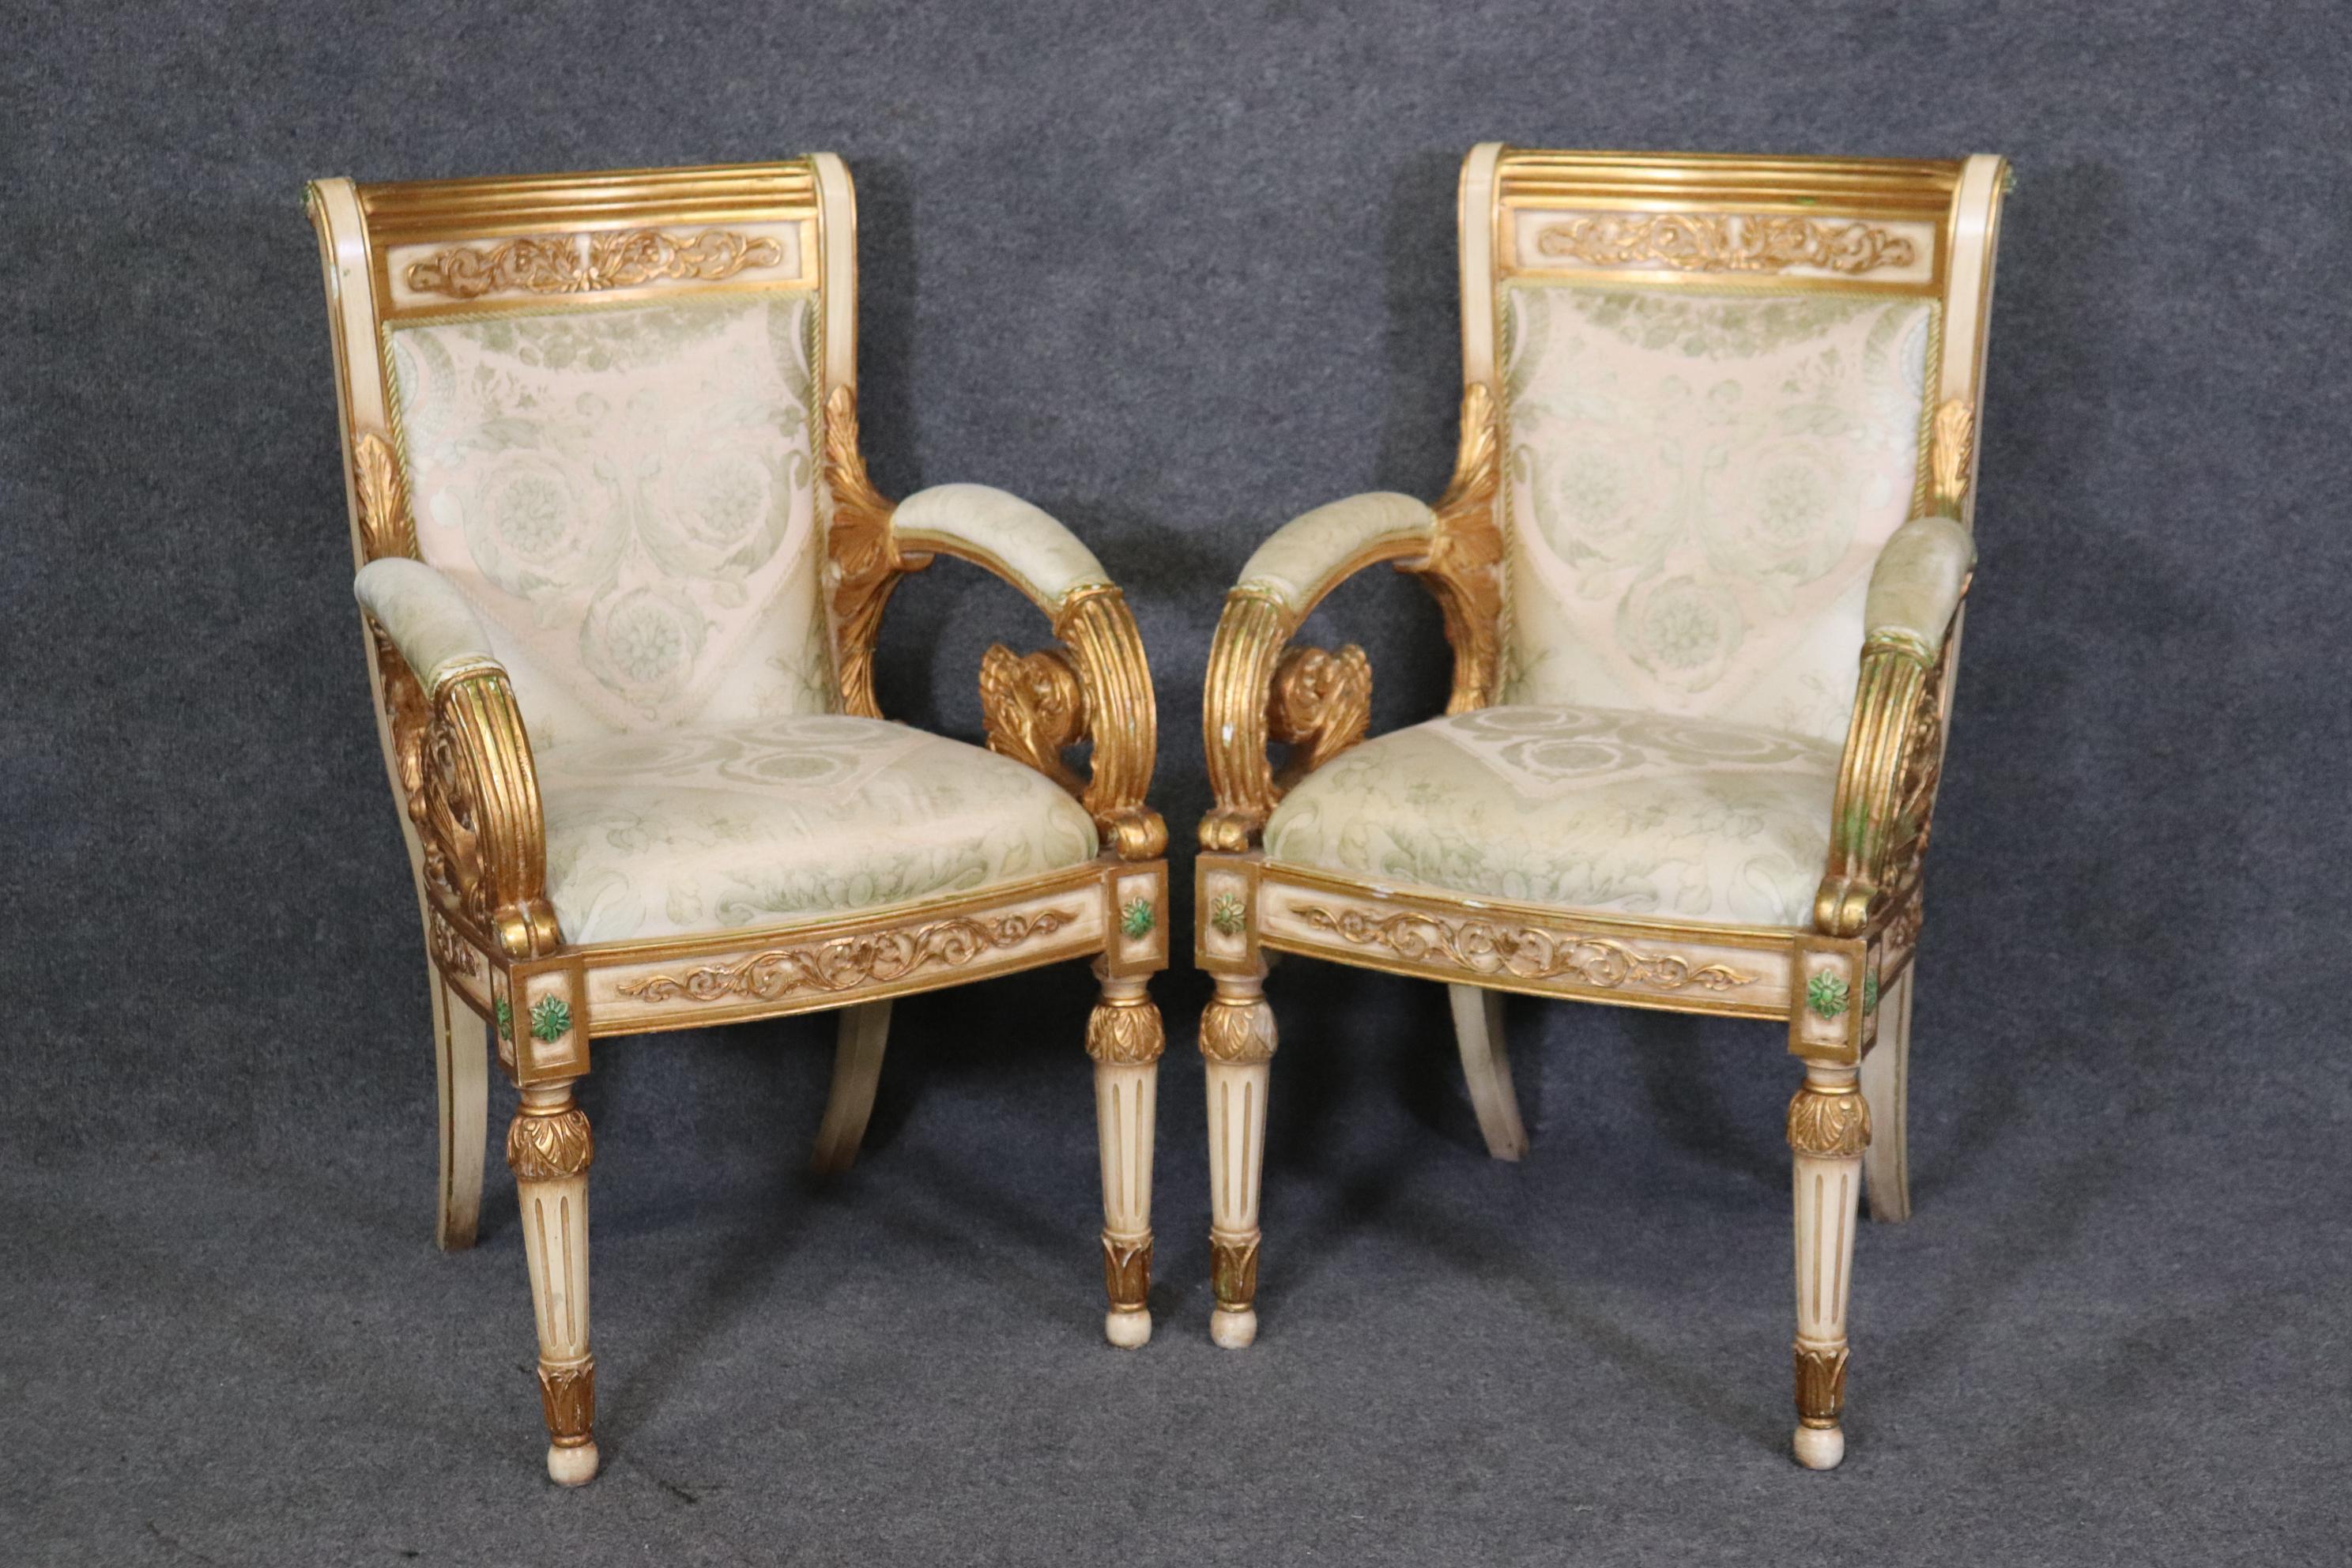 This is a pair, one of two pairs available. This pair has nice older upholstery and beautiful gold leaf finishes and extraordinary carving and detail. They each measures 36 tall x 21.5 wide x 23 deep and a seat height 19 and date to the 1930s era.